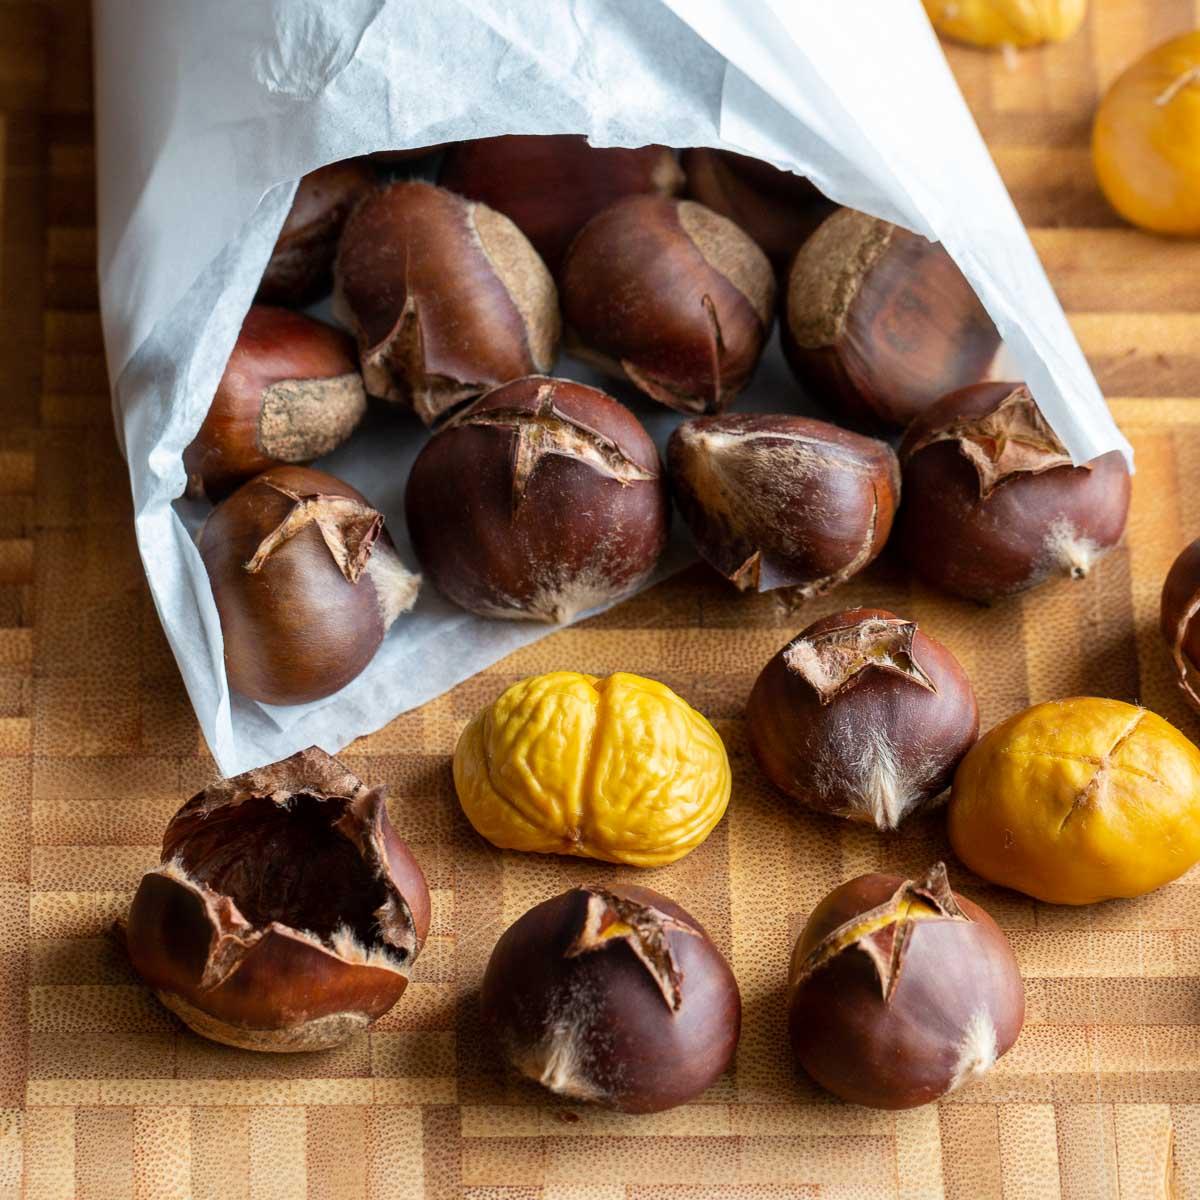 Roasted chestnuts falling out of a paper bag